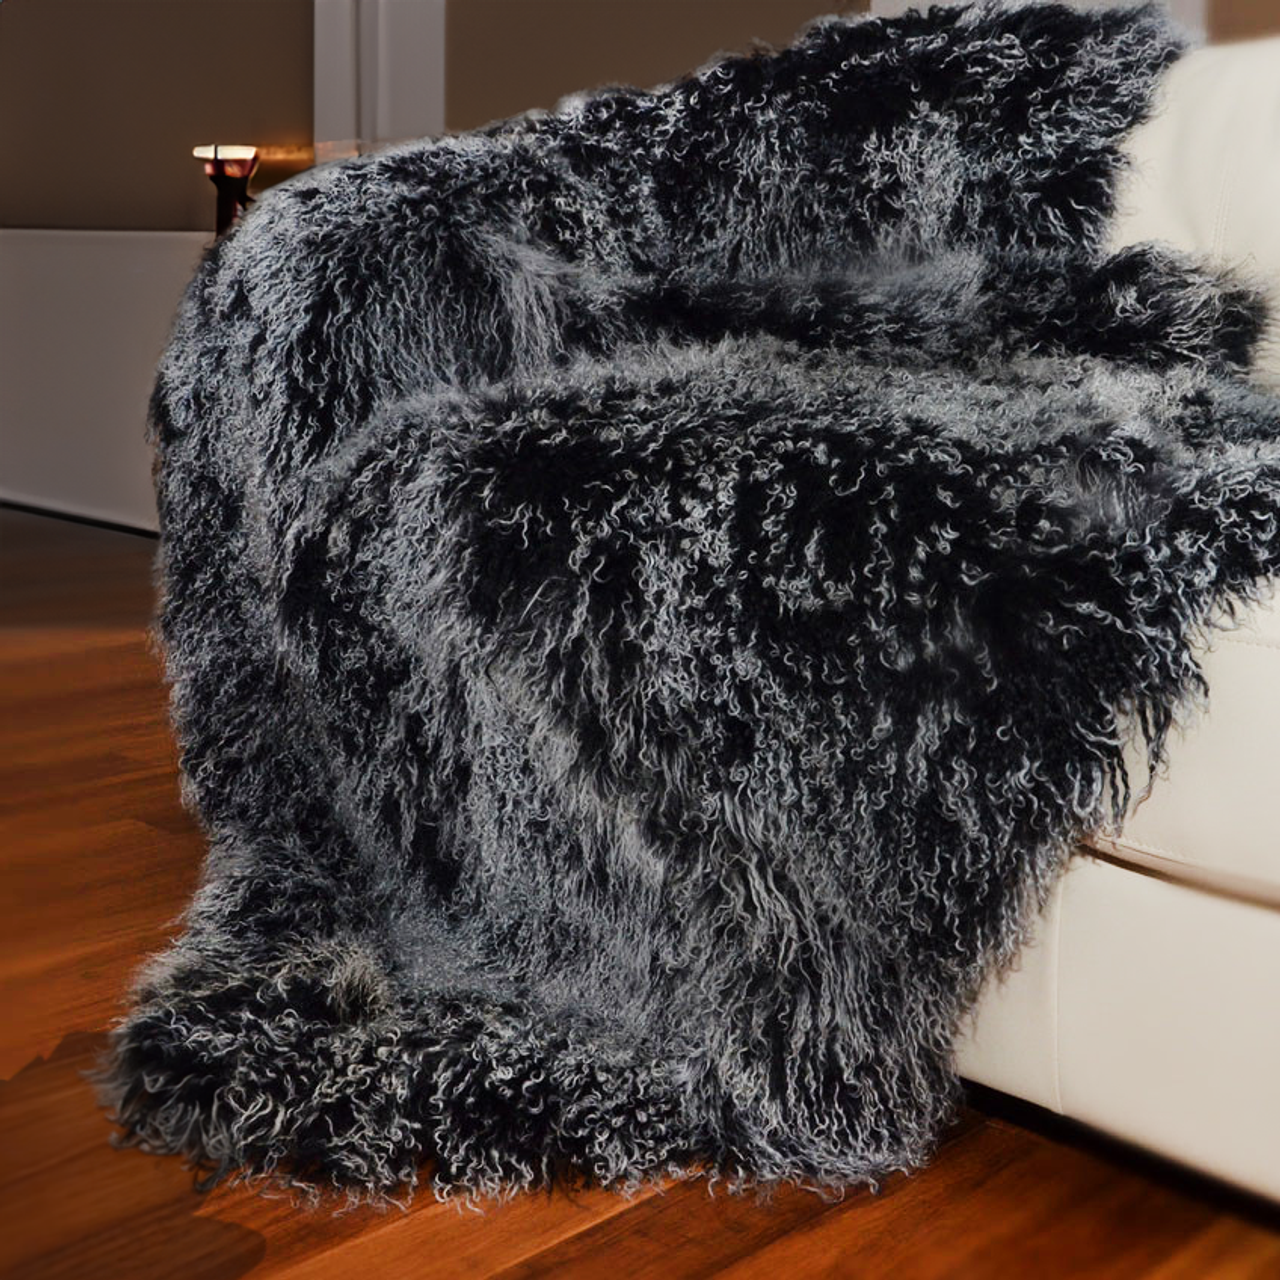 https://cdn11.bigcommerce.com/s-1f7e8/images/stencil/1280x1280/products/594/7581/frosted_black_fur_throw__22113.1698552939.png?c=3